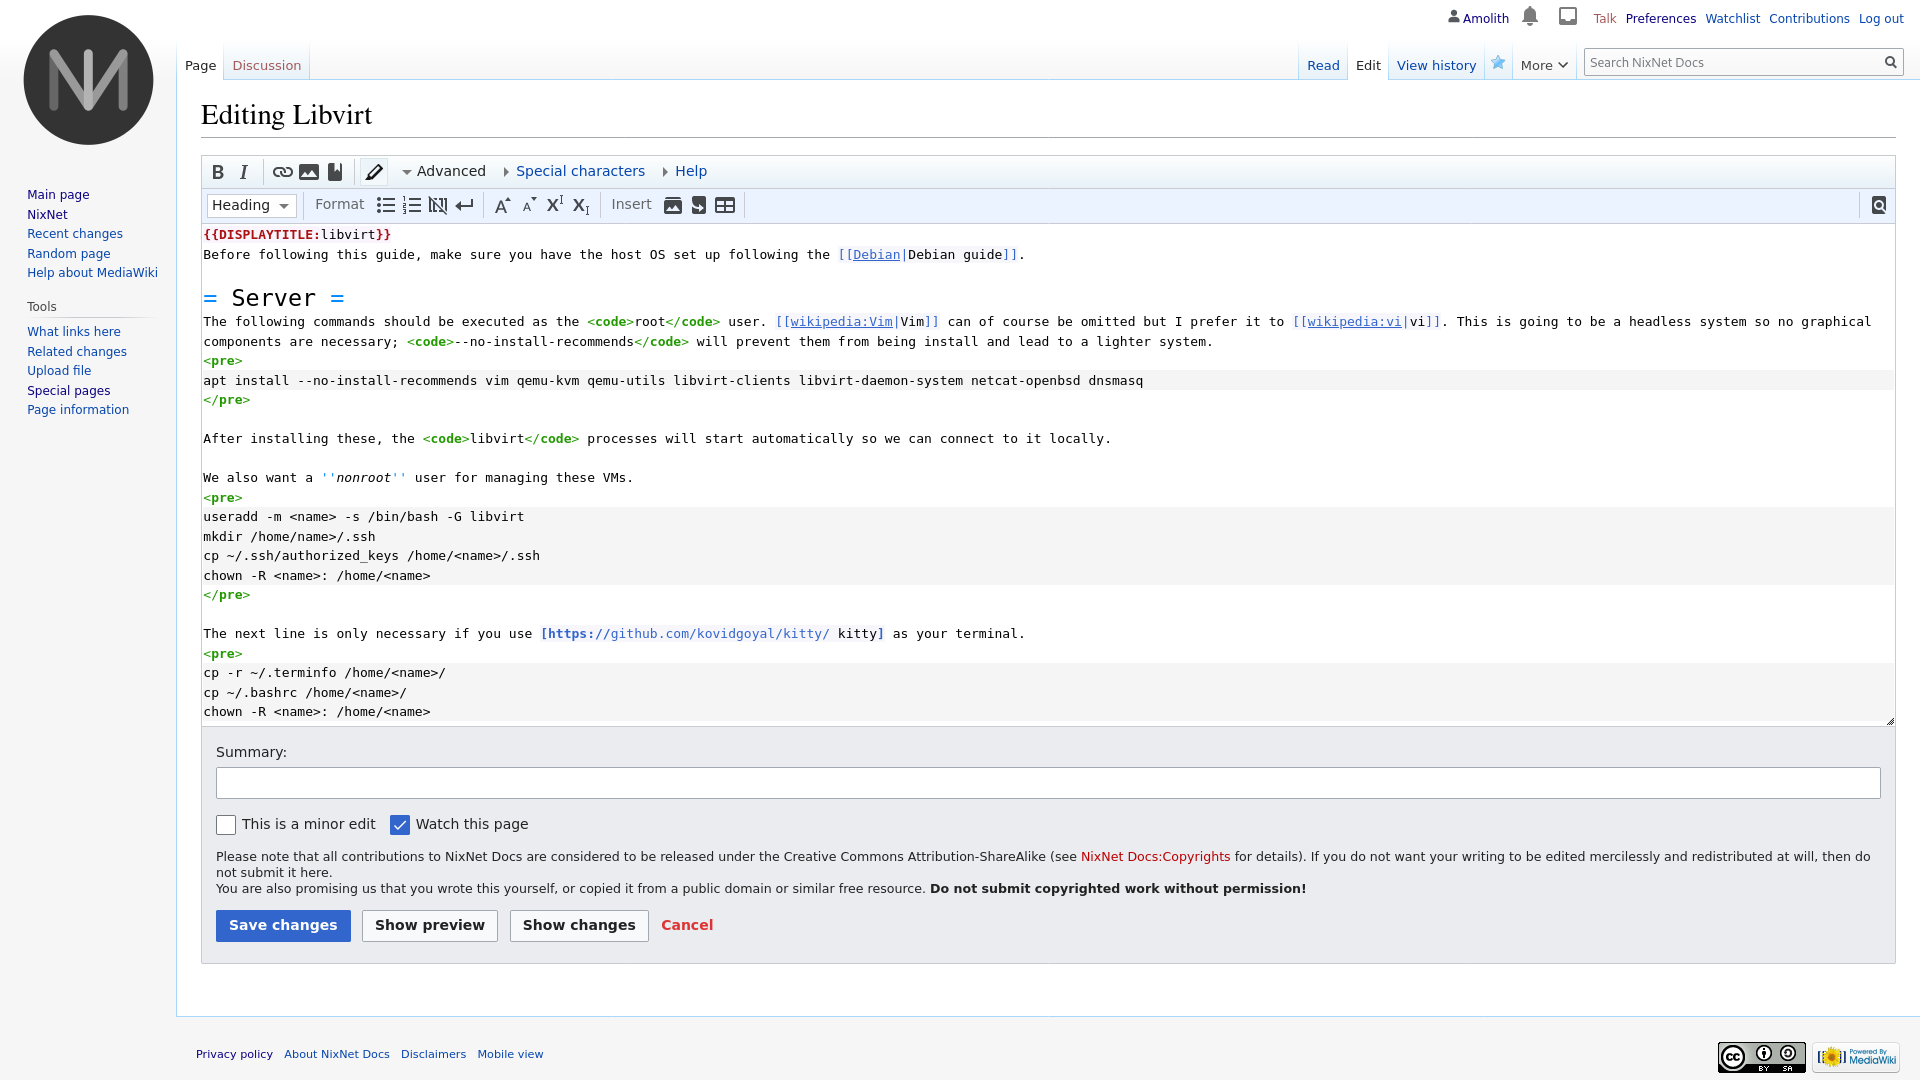 screenshot of the mediawiki editor. headers are larger, code blocksare highlighted, links blue with link text black so it’s easy to pickout, etc. In all, it’s a much nicerexperience.